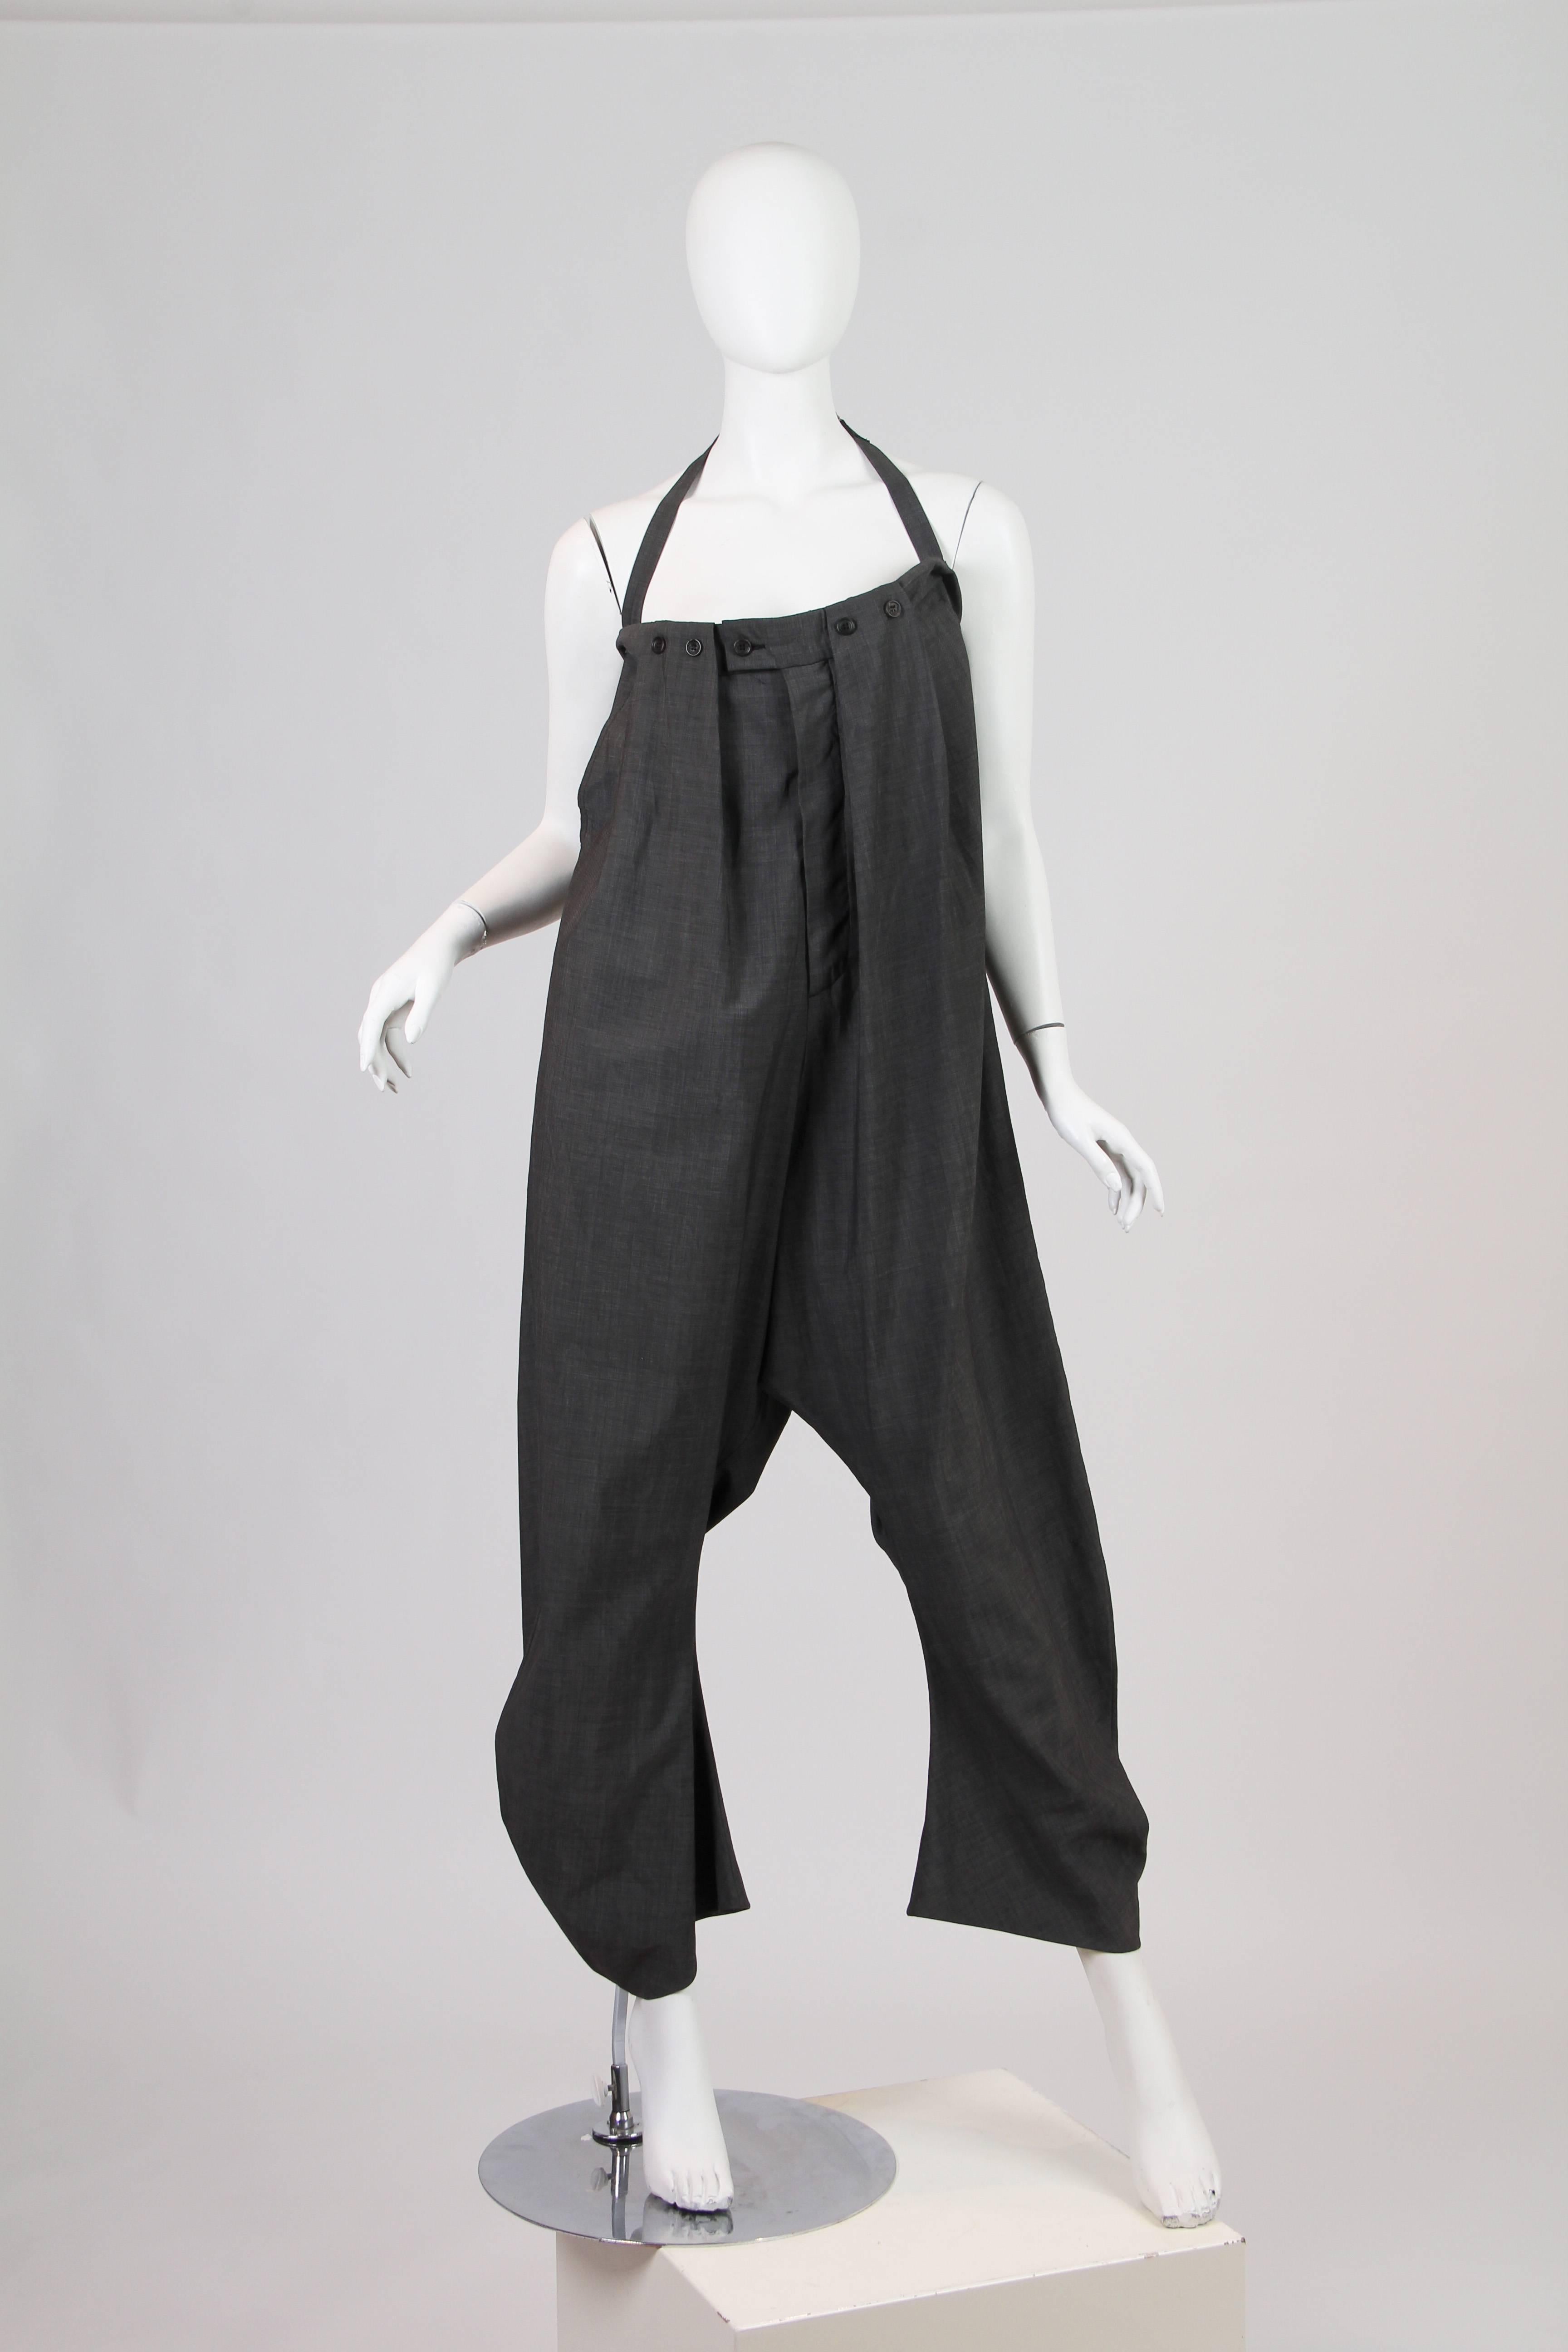 Black John Galliano Trousers which double as a Jumpsuit